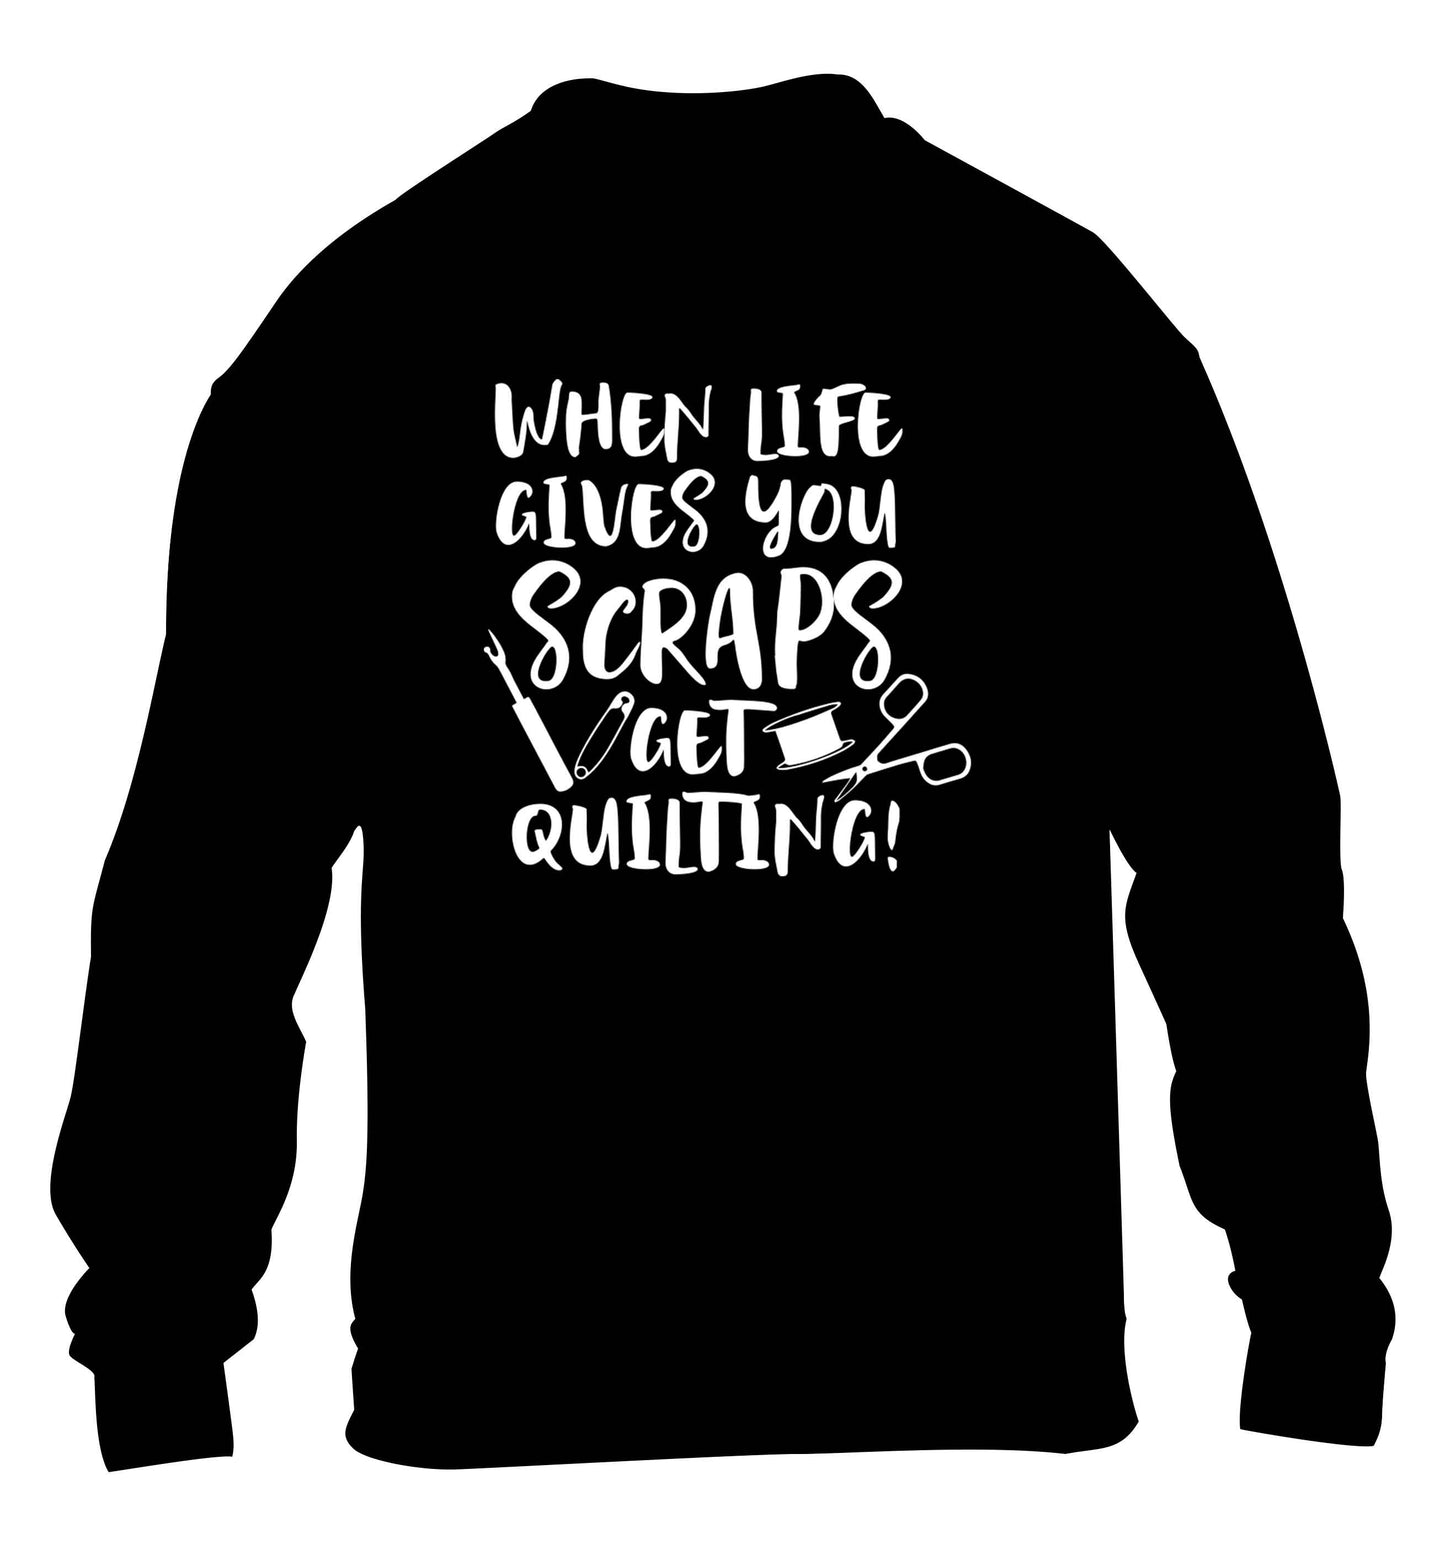 When life gives you scraps get quilting! children's black sweater 12-13 Years